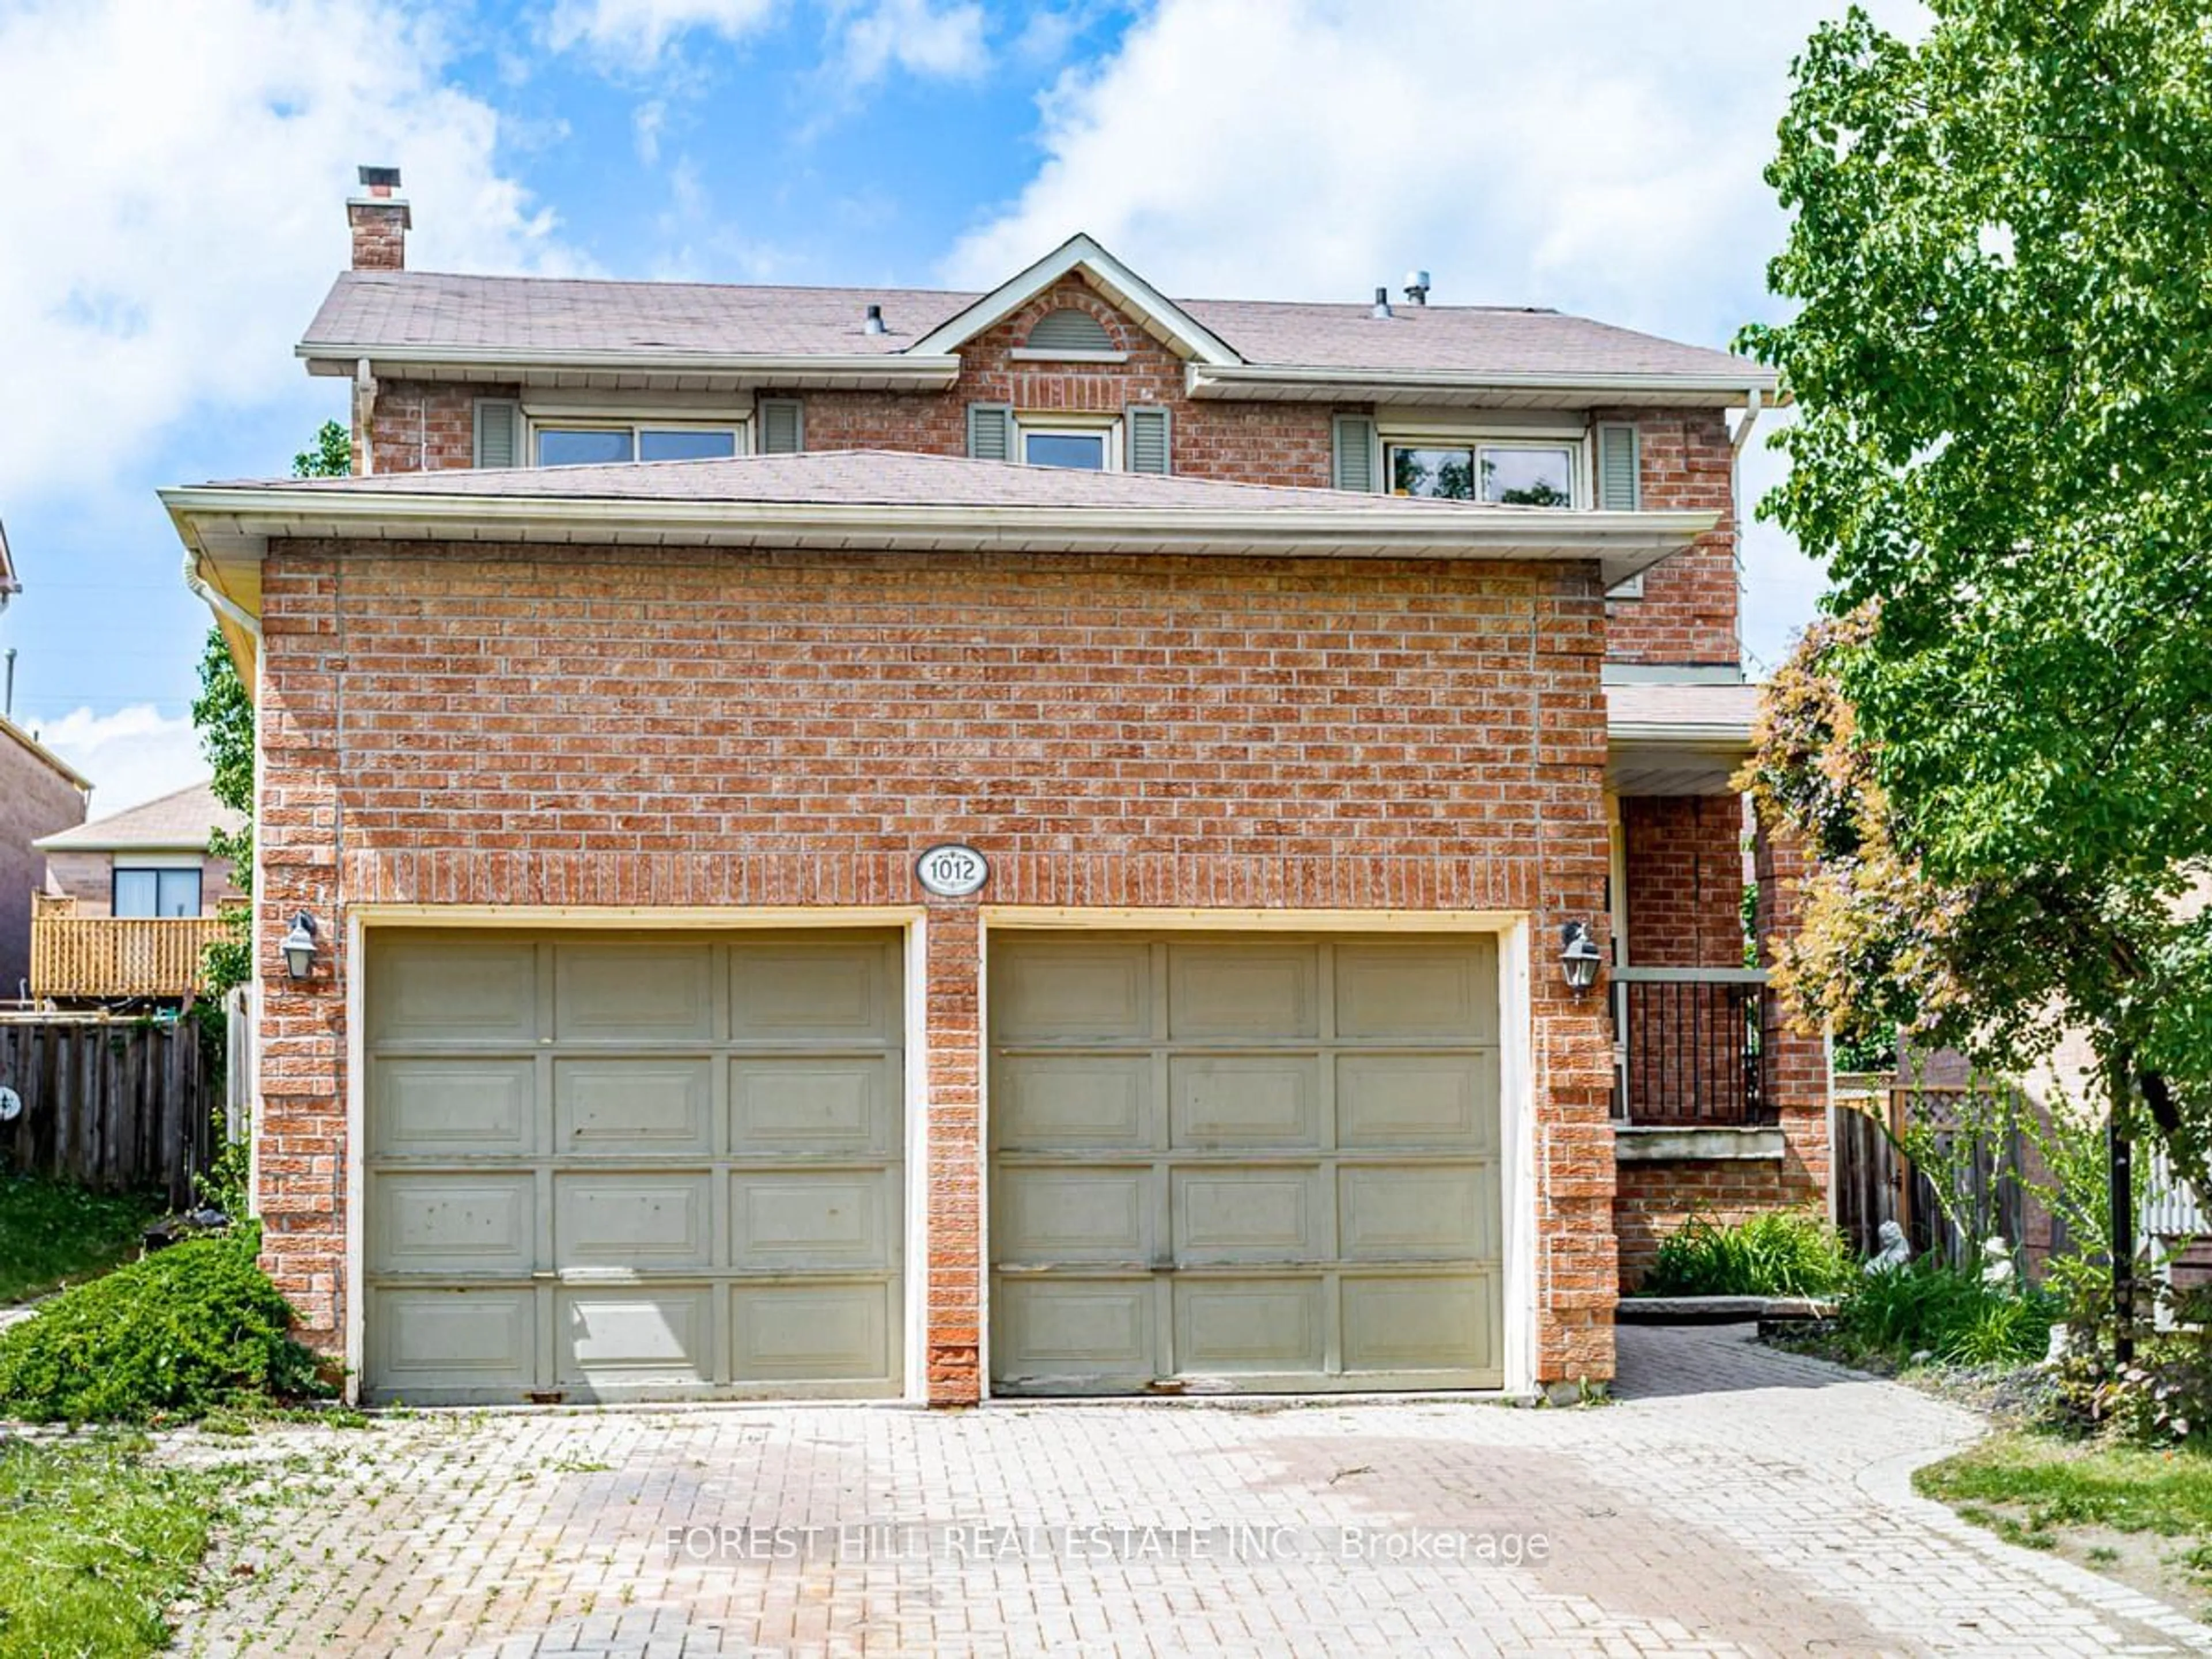 Home with brick exterior material for 1012 Colonial St, Pickering Ontario L1X 1N9